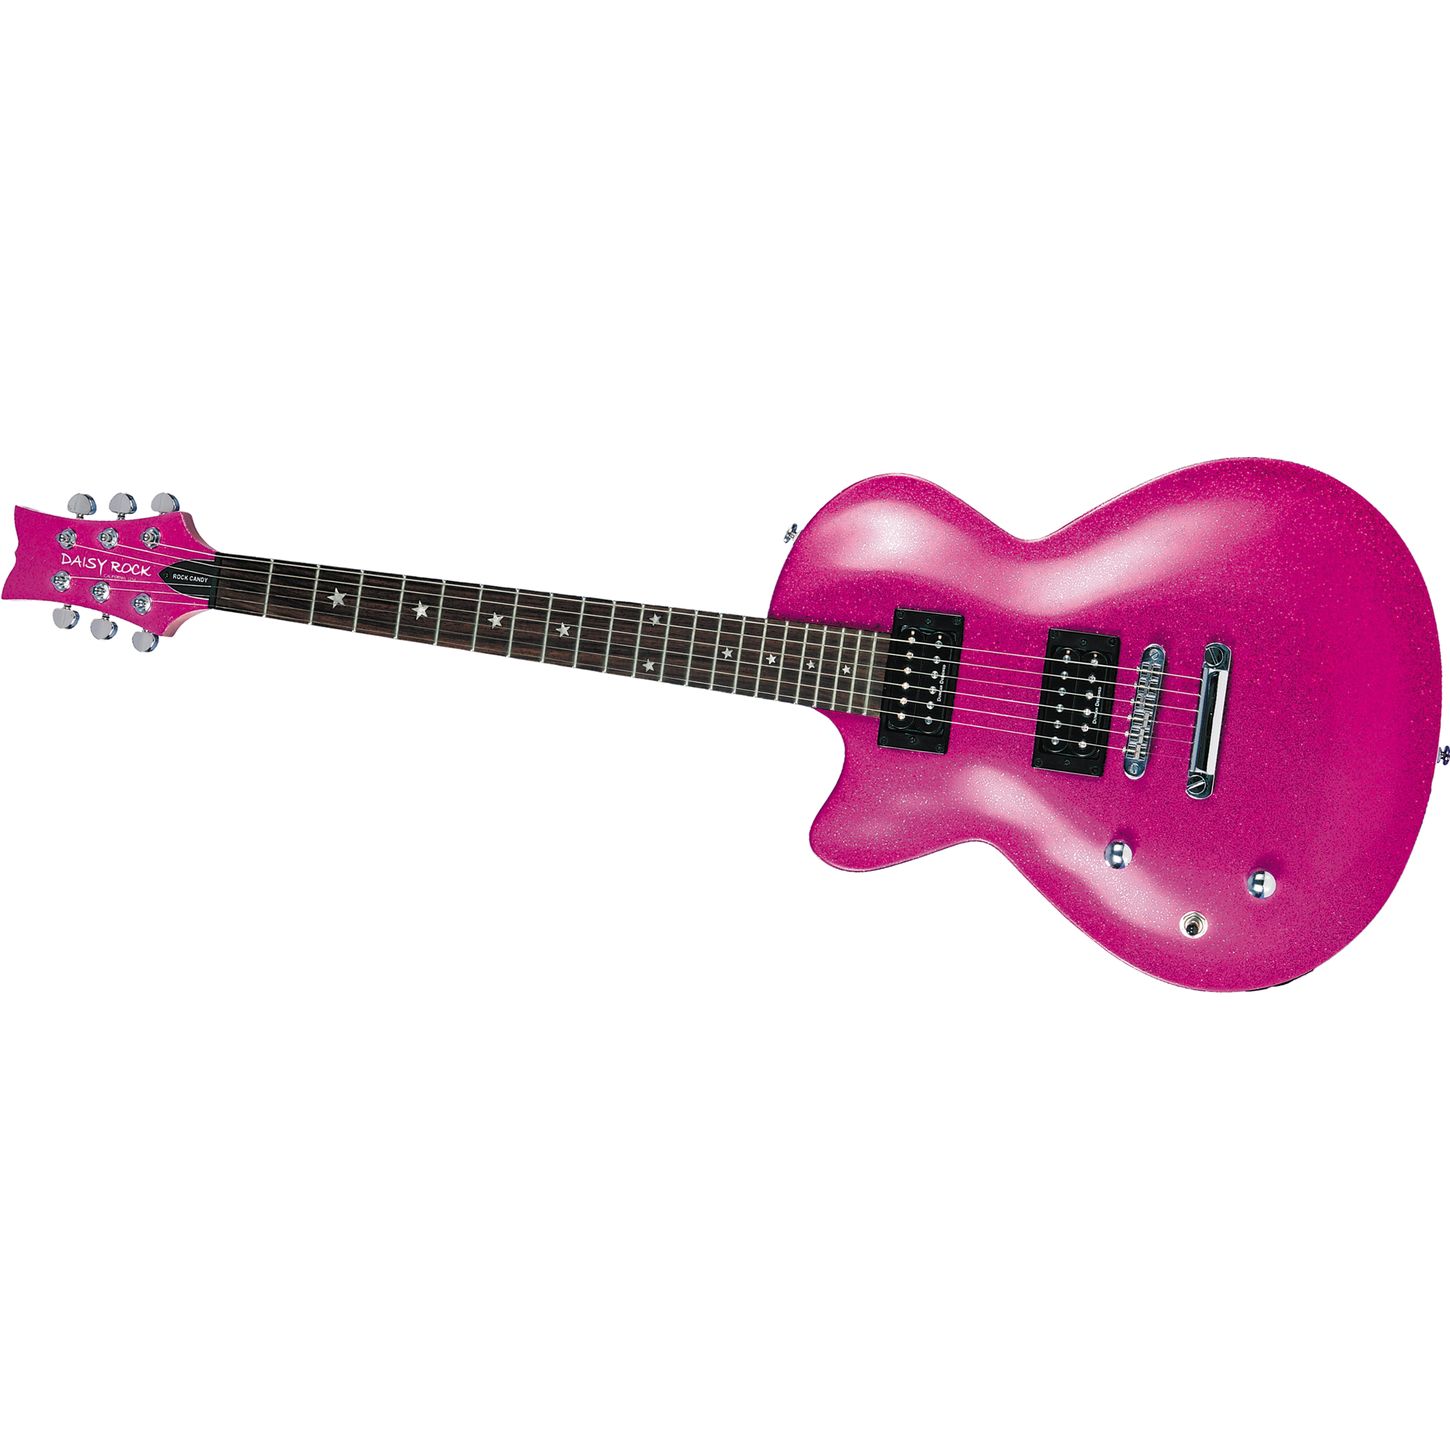 Free Pink Guitar Clipart Image.